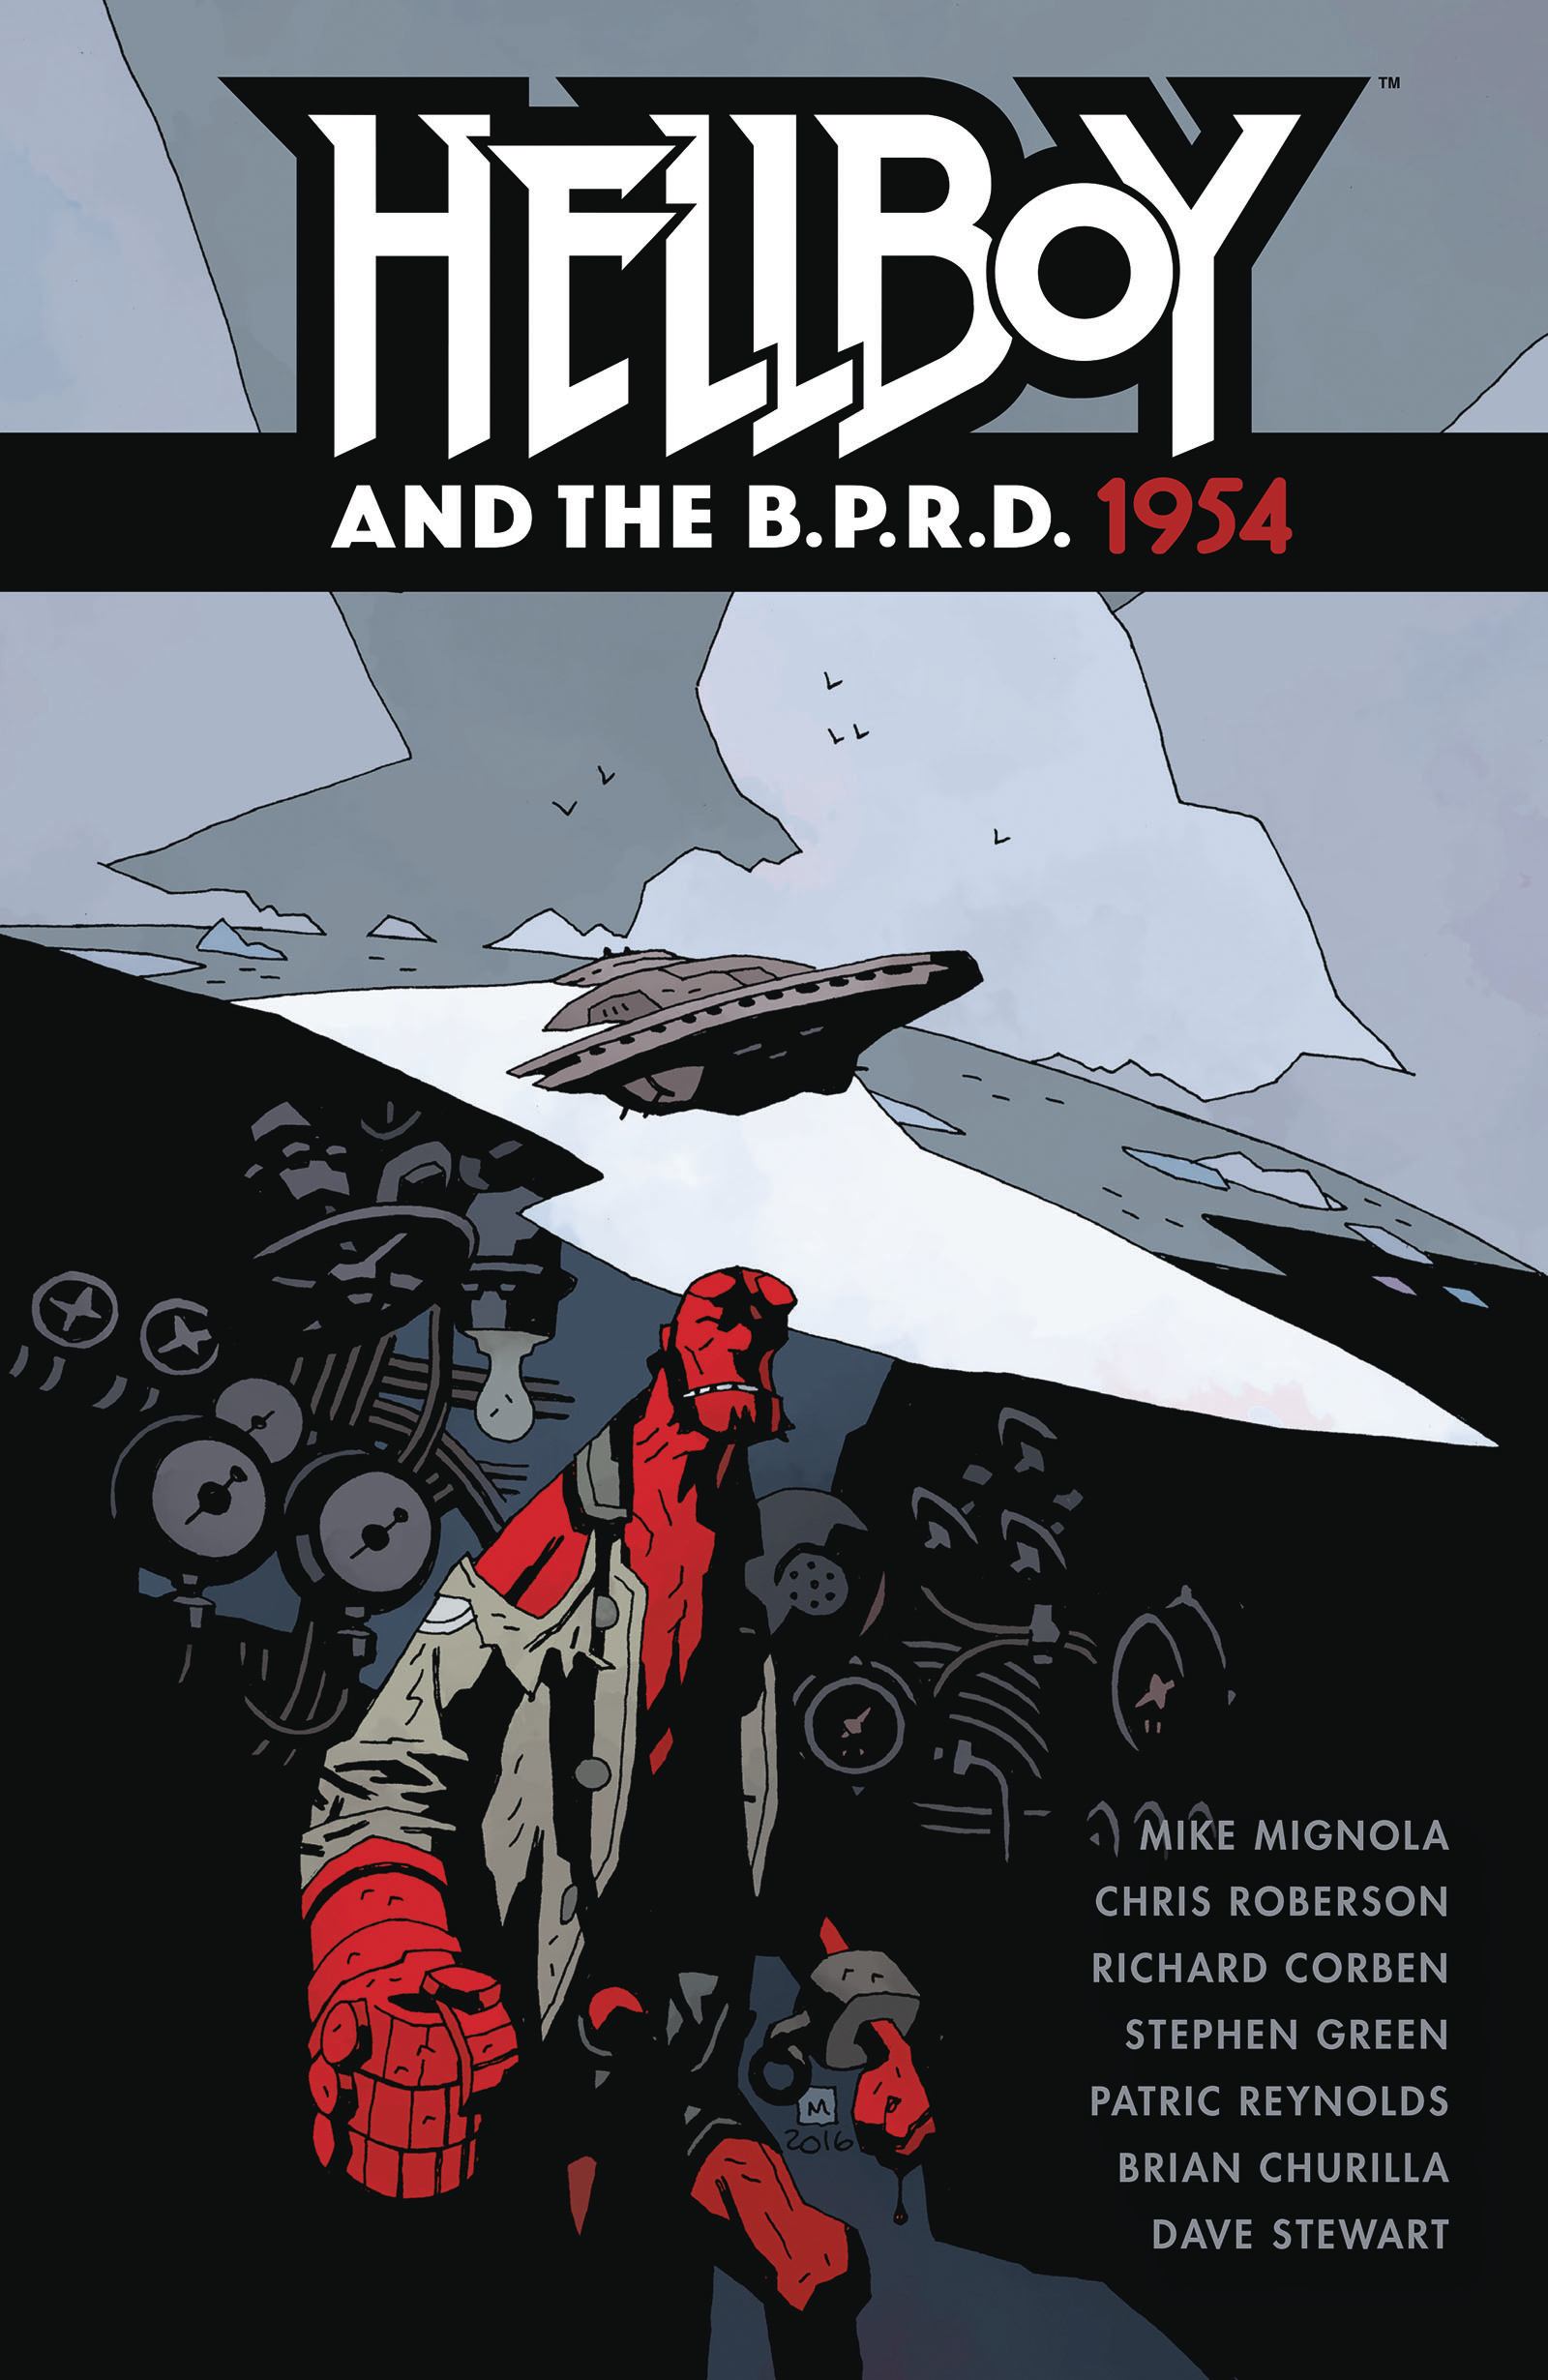 Hellboy and the B.P.R.D. 1954 Graphic Novel